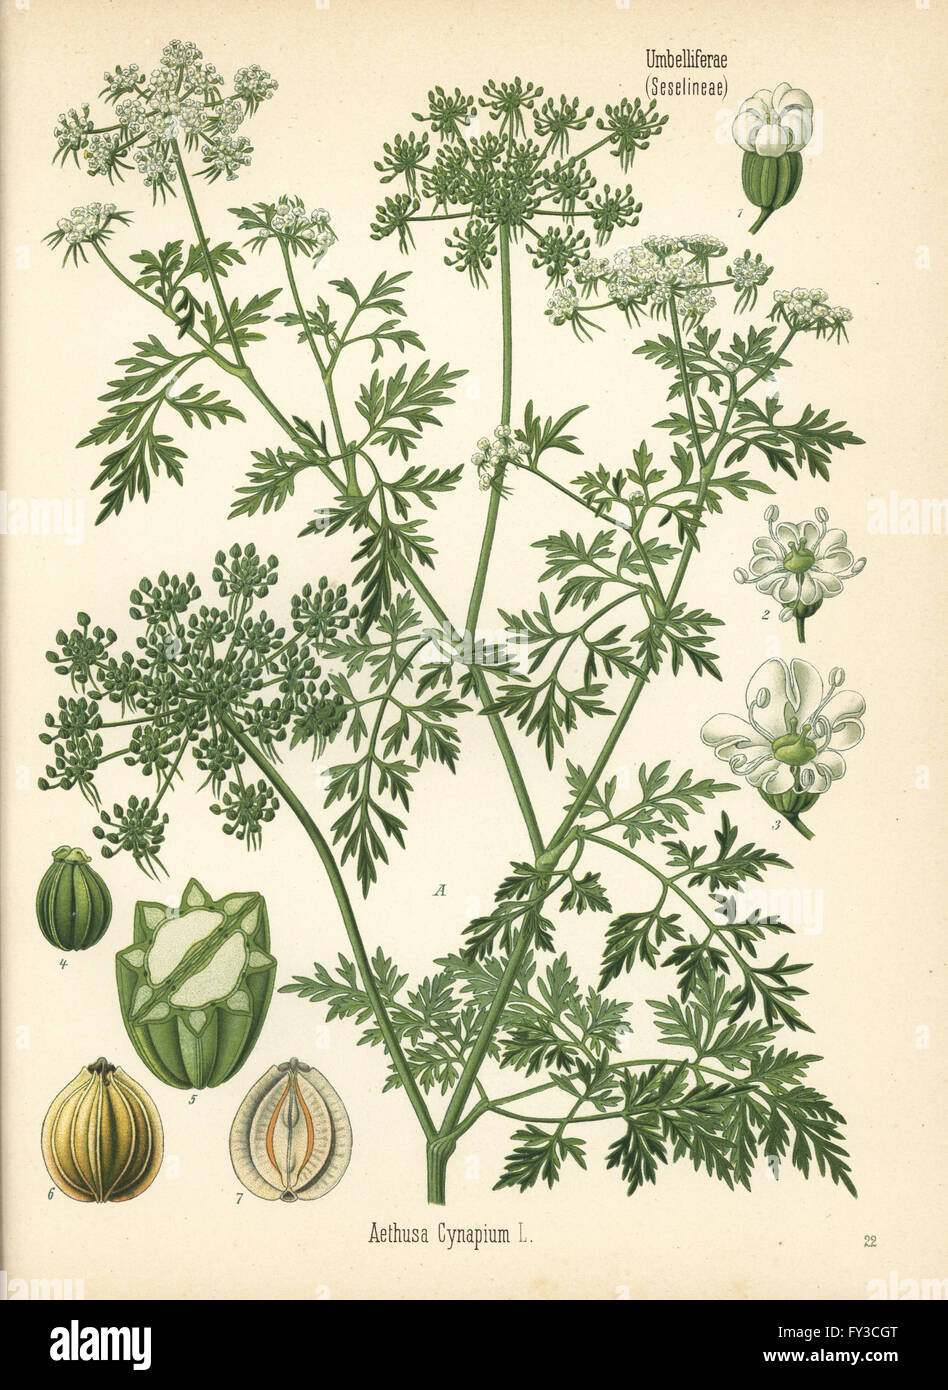 Fool's parsley or fool's cicely, Aethusa cynapium. Chromolithograph after a botanical illustration from Hermann Adolph Koehler's Medicinal Plants, edited by Gustav Pabst, Koehler, Germany, 1887. Stock Photo